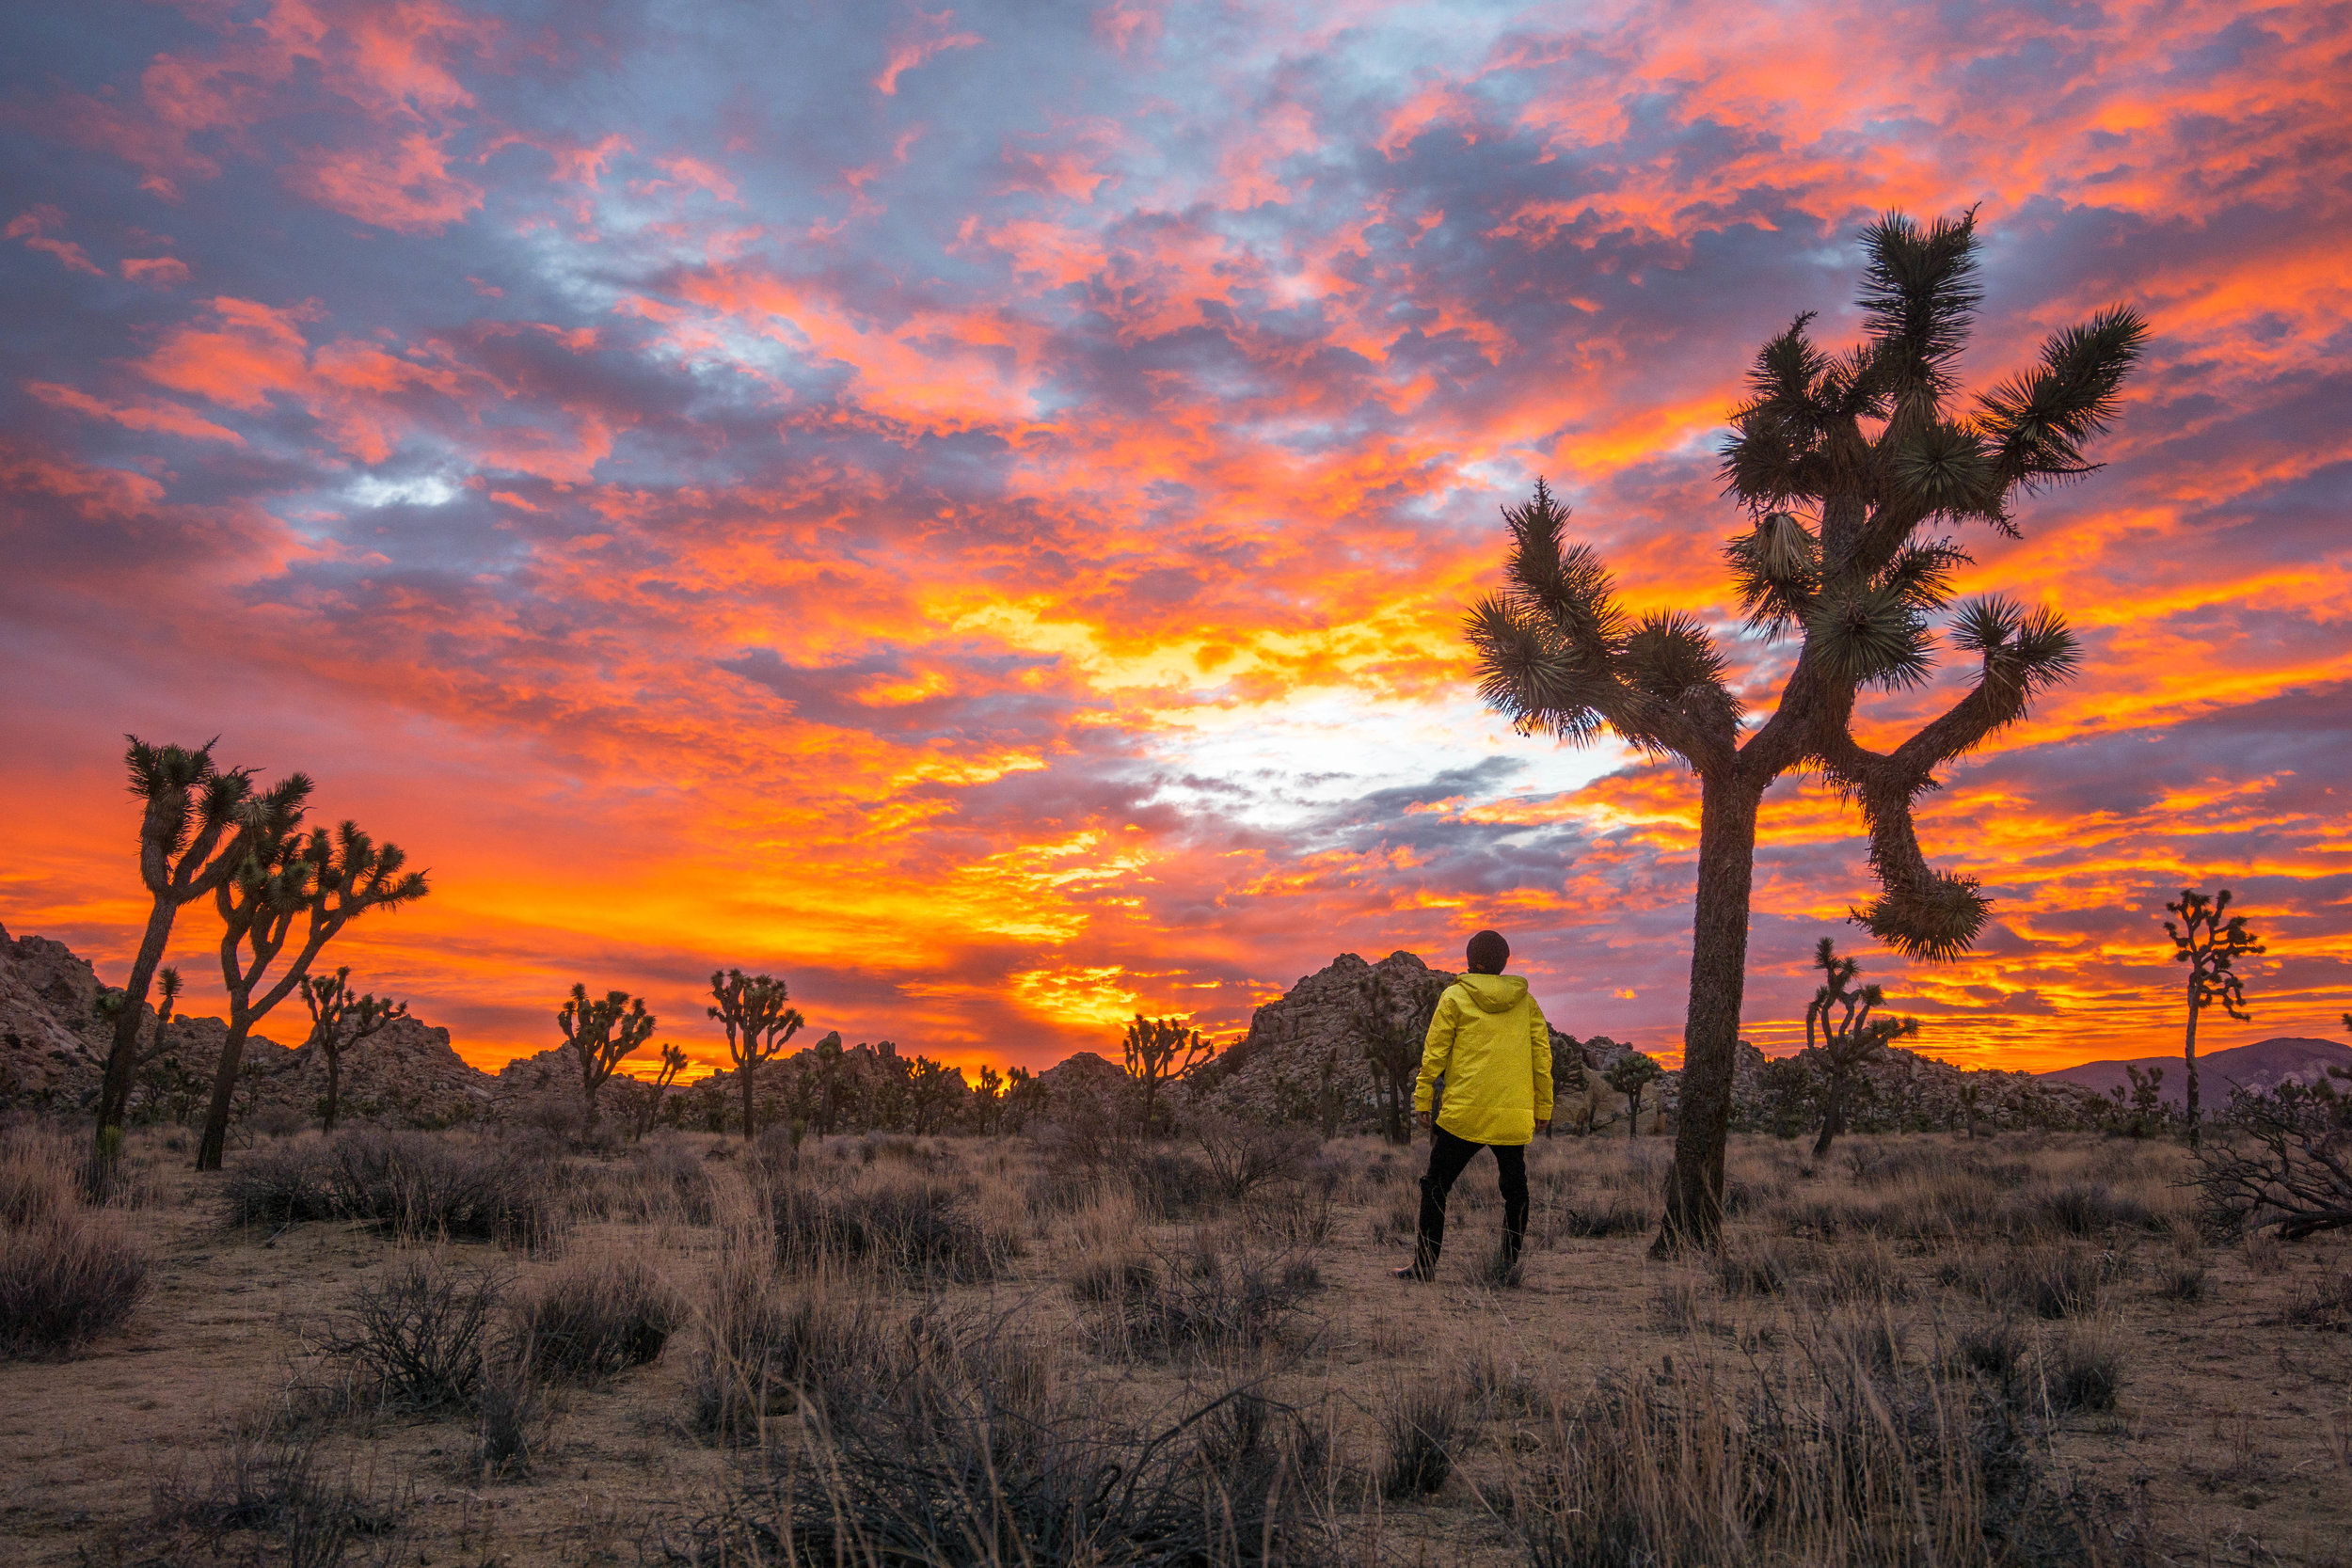 As the sky continued to burn like a colorful inferno, we wandered in amazement among Joshua Tree's alien landscape.